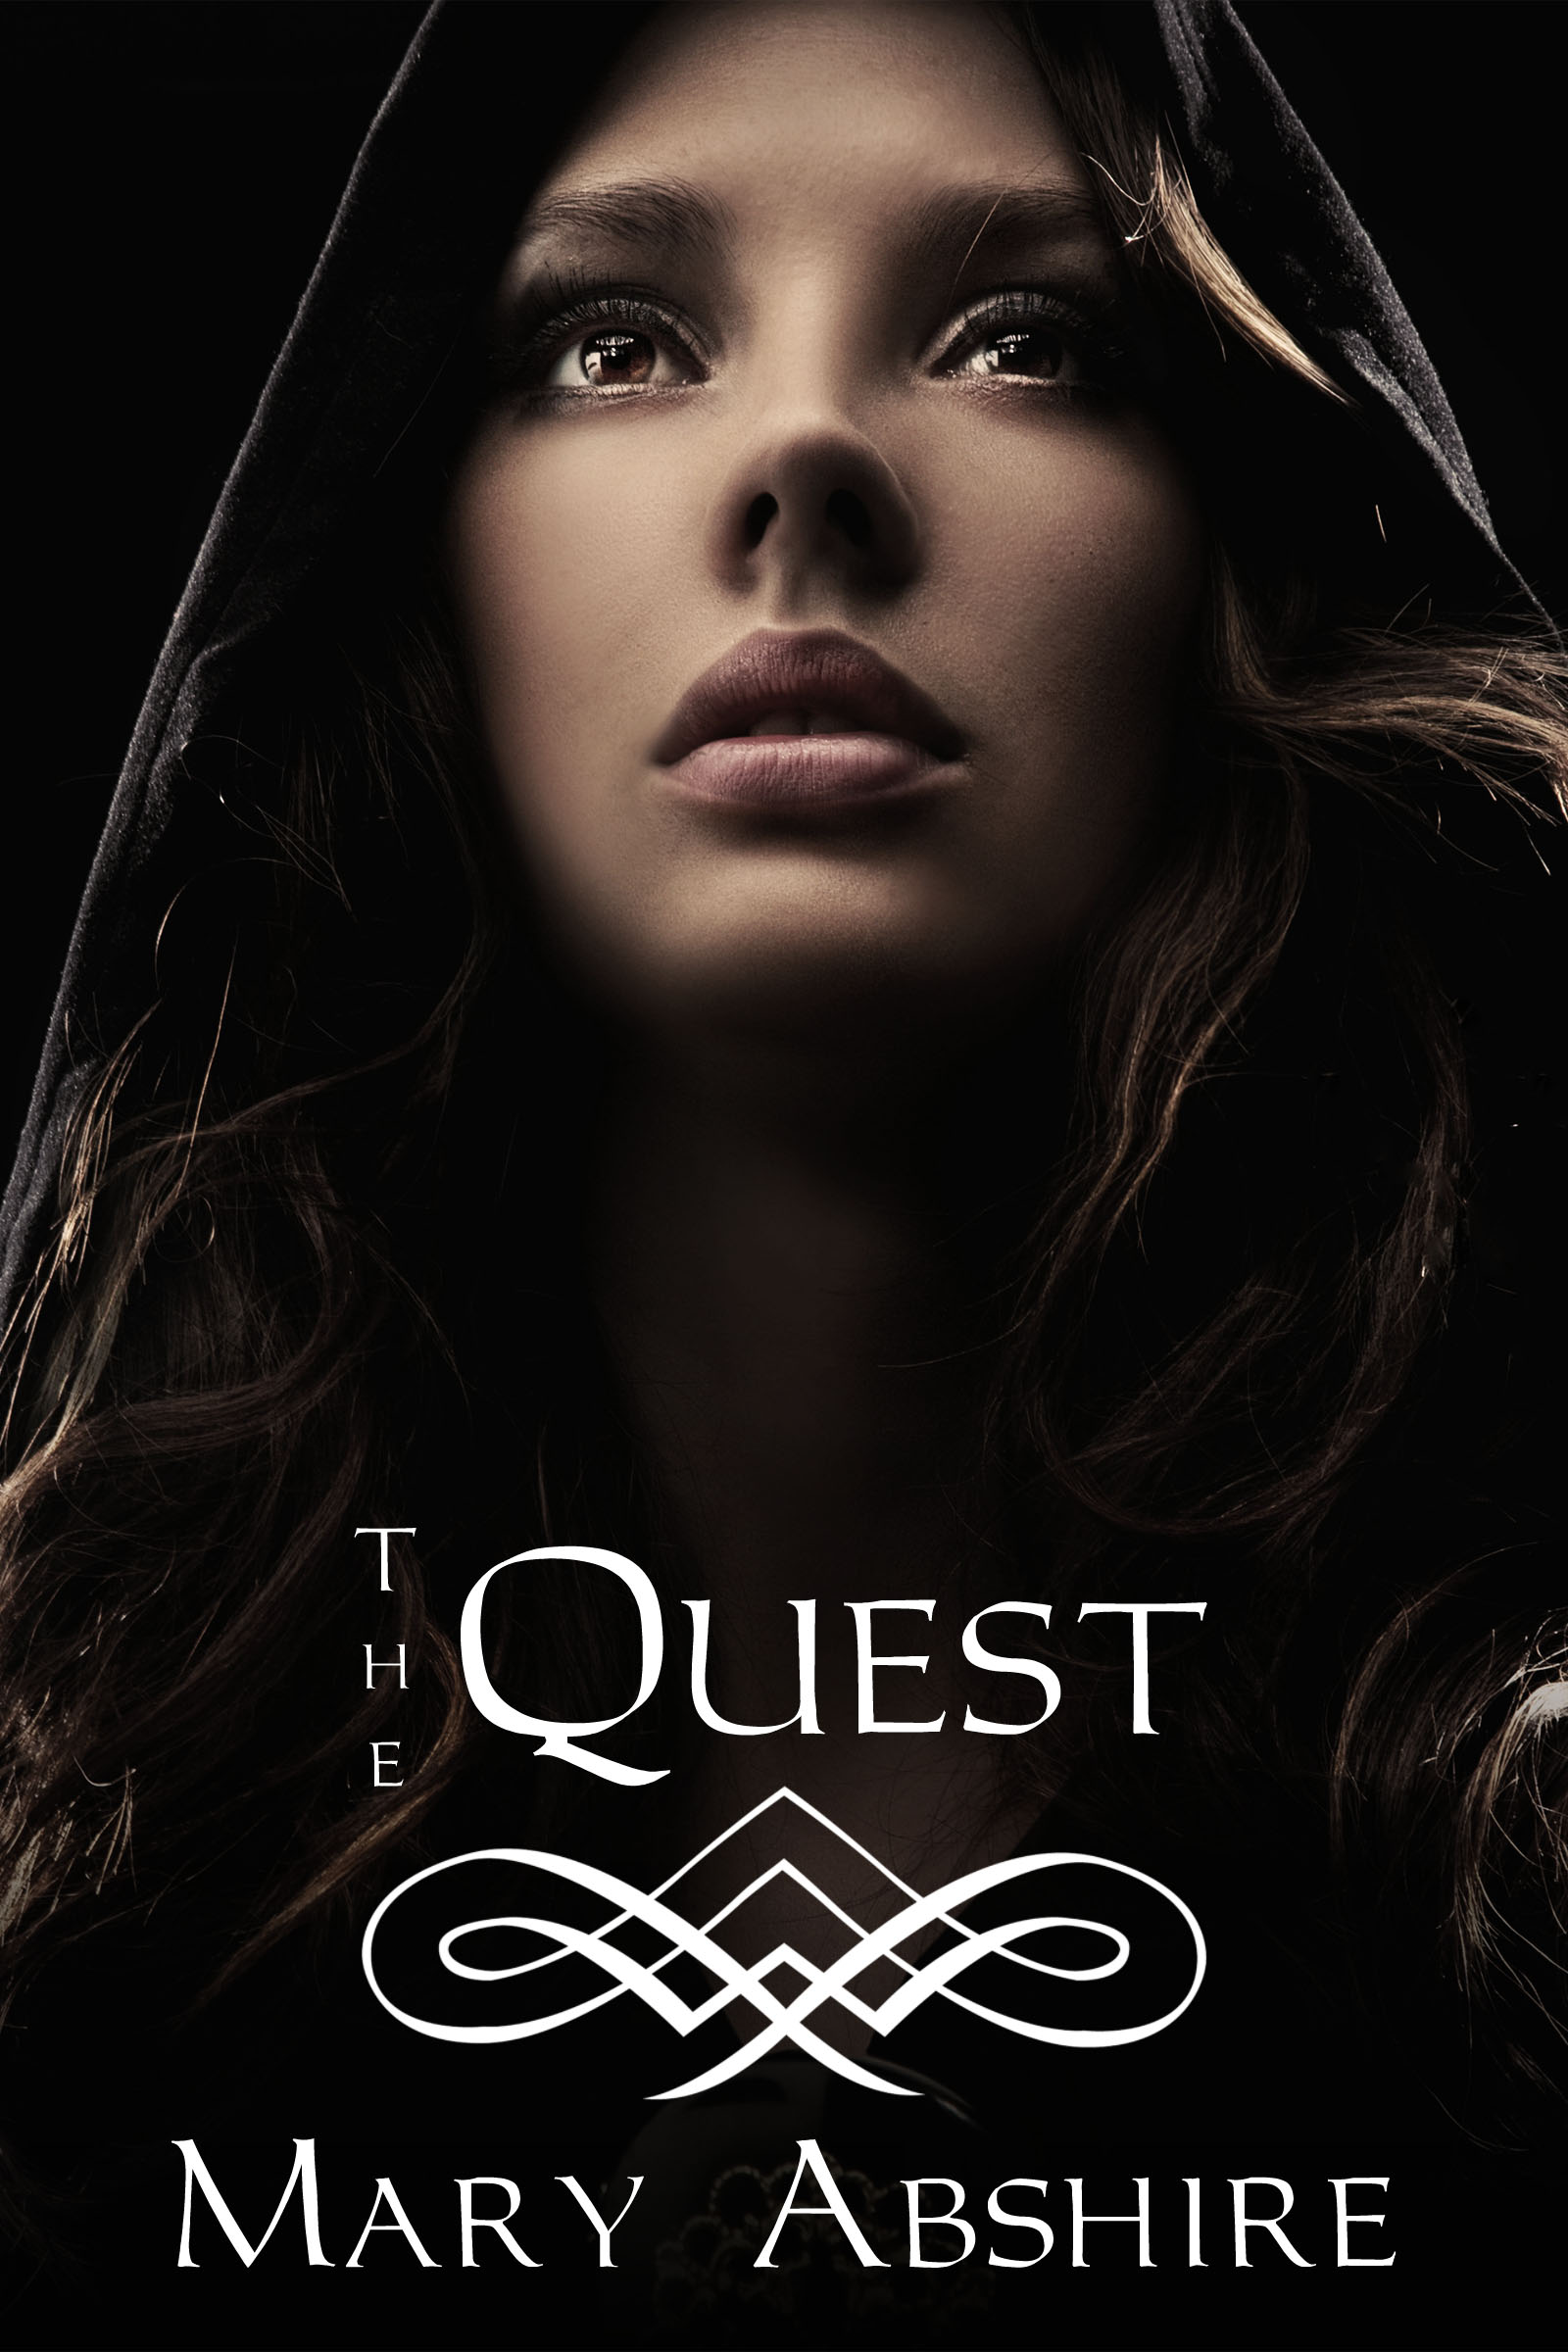 Project Eve thequest